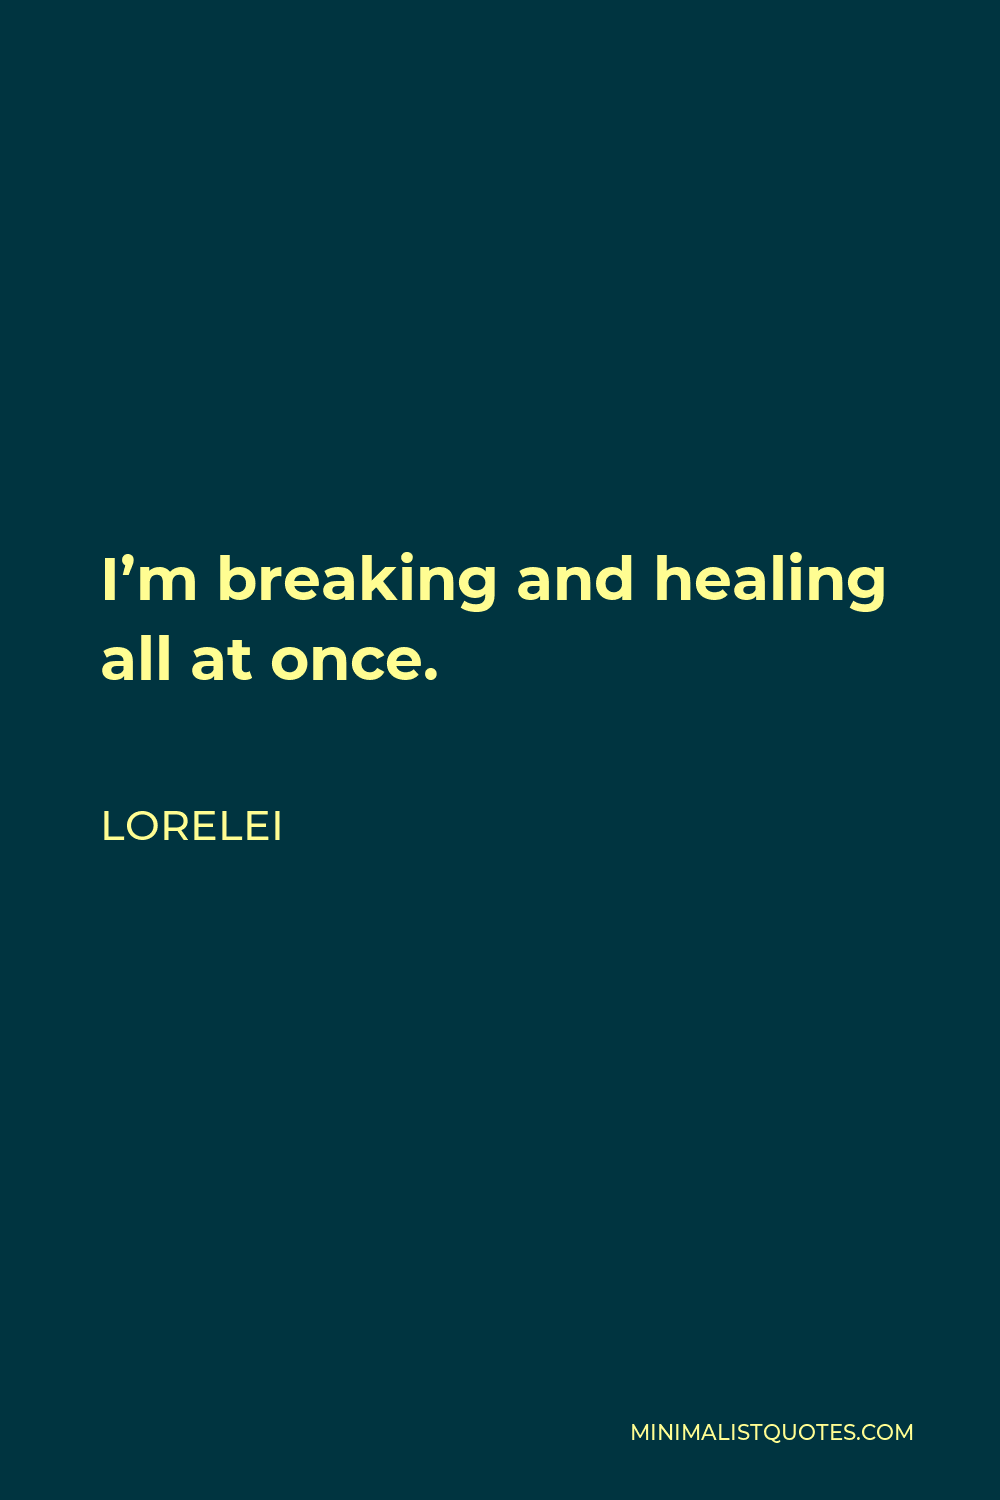 Lorelei Quote - I’m breaking and healing all at once.